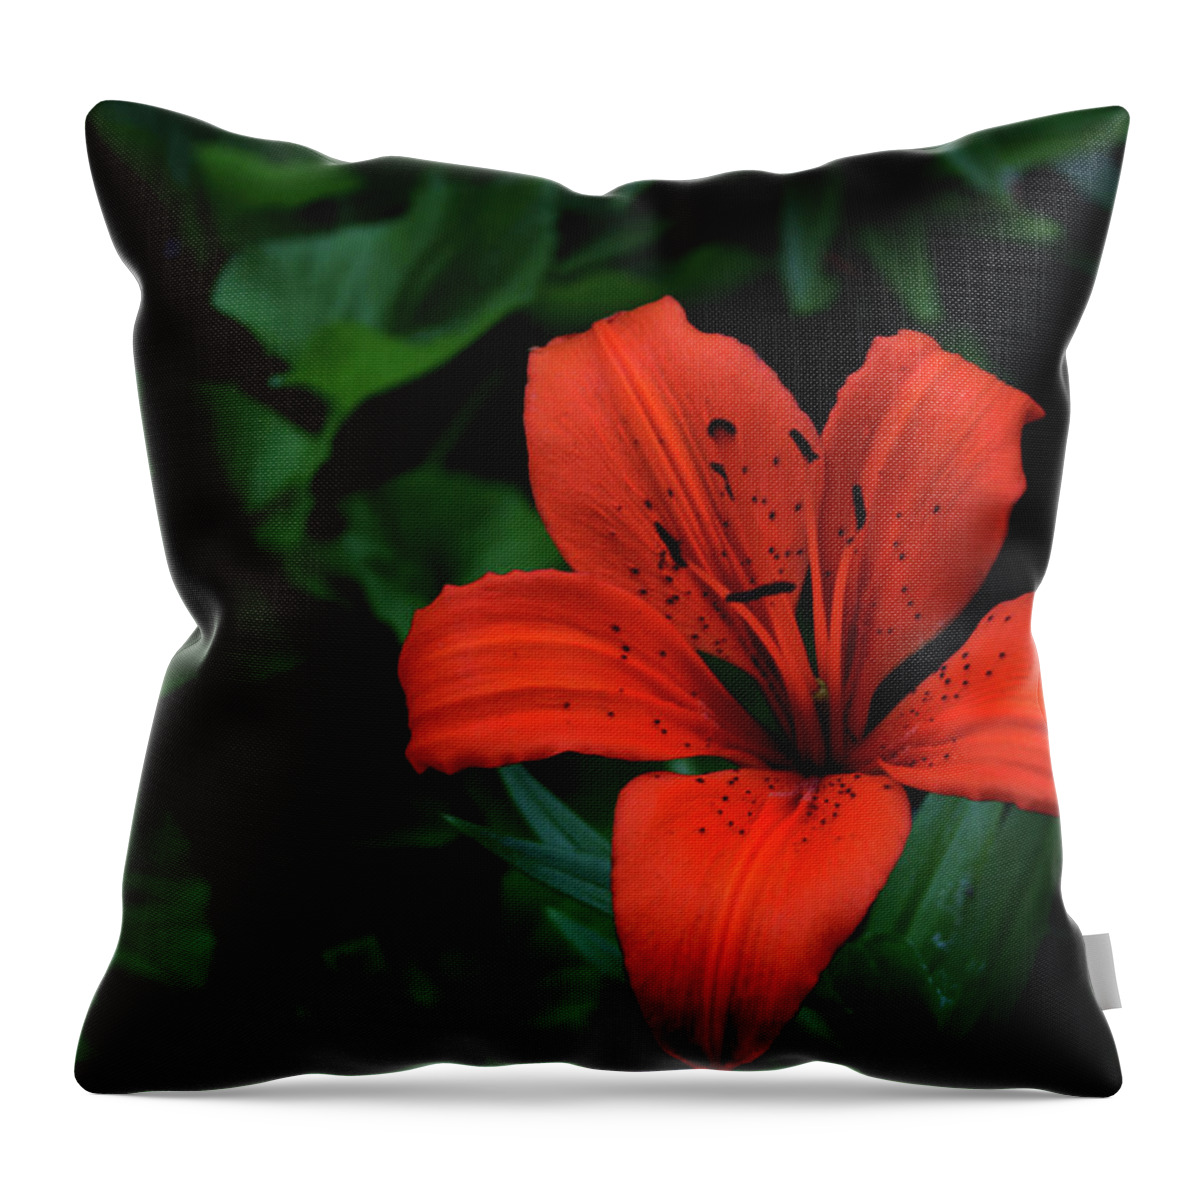 Lily Throw Pillow featuring the photograph Lily 2021 by Cathy Harper